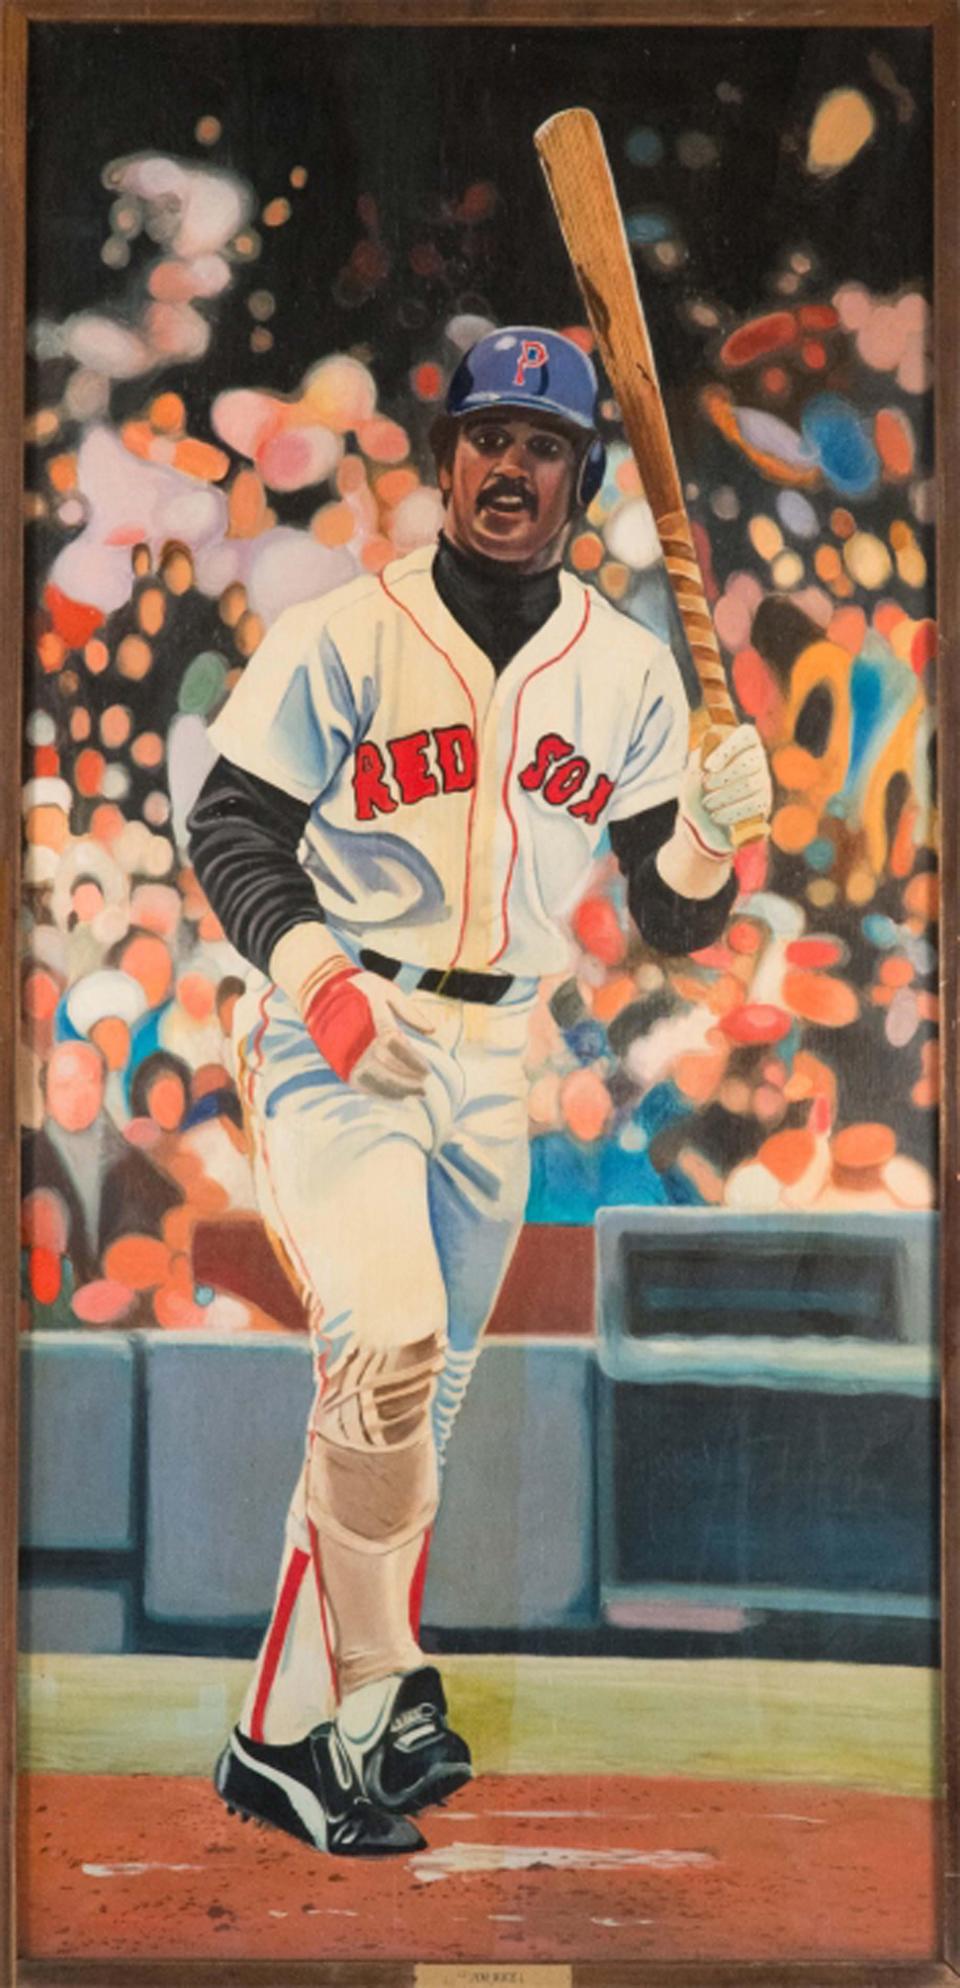 The mural of former Red Sox great Jim Rice.